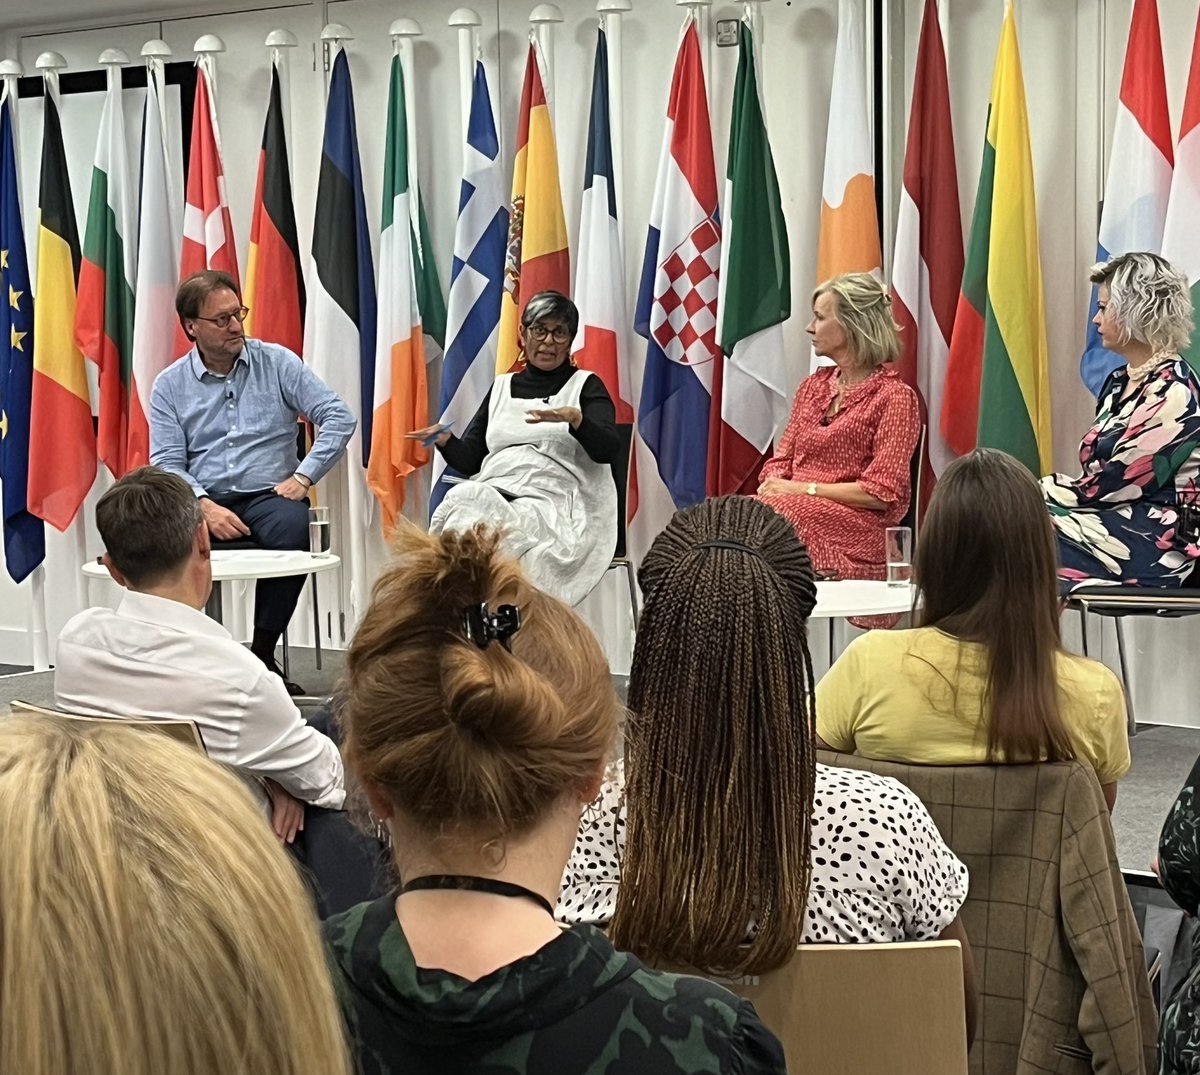 Huge thanks to our fantastic panel @lilaineurope, Vicky Broakes @londonbiennale, @kullyLeeds2023 and event partners @uk_aspen for the rich conversation on the power of cultural industries ..introduced by @PedroSerranoEU & moderated by @BOP_Consulting, the full house was riveted!